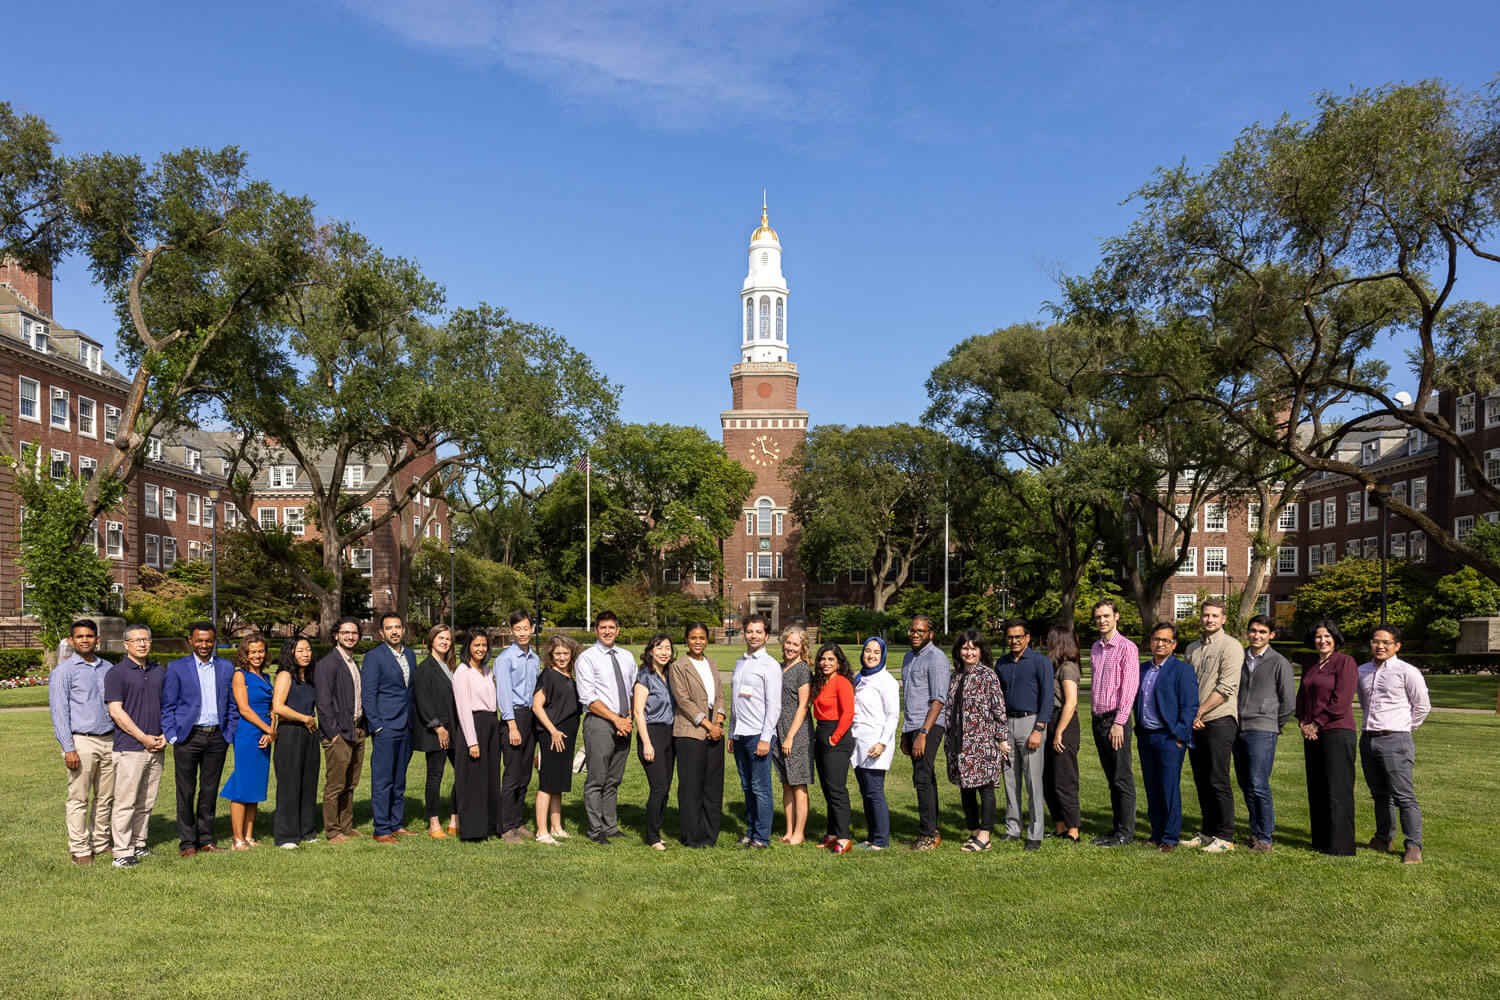 Brooklyn College welcomed the largest new group of faculty in recent memory to campus.